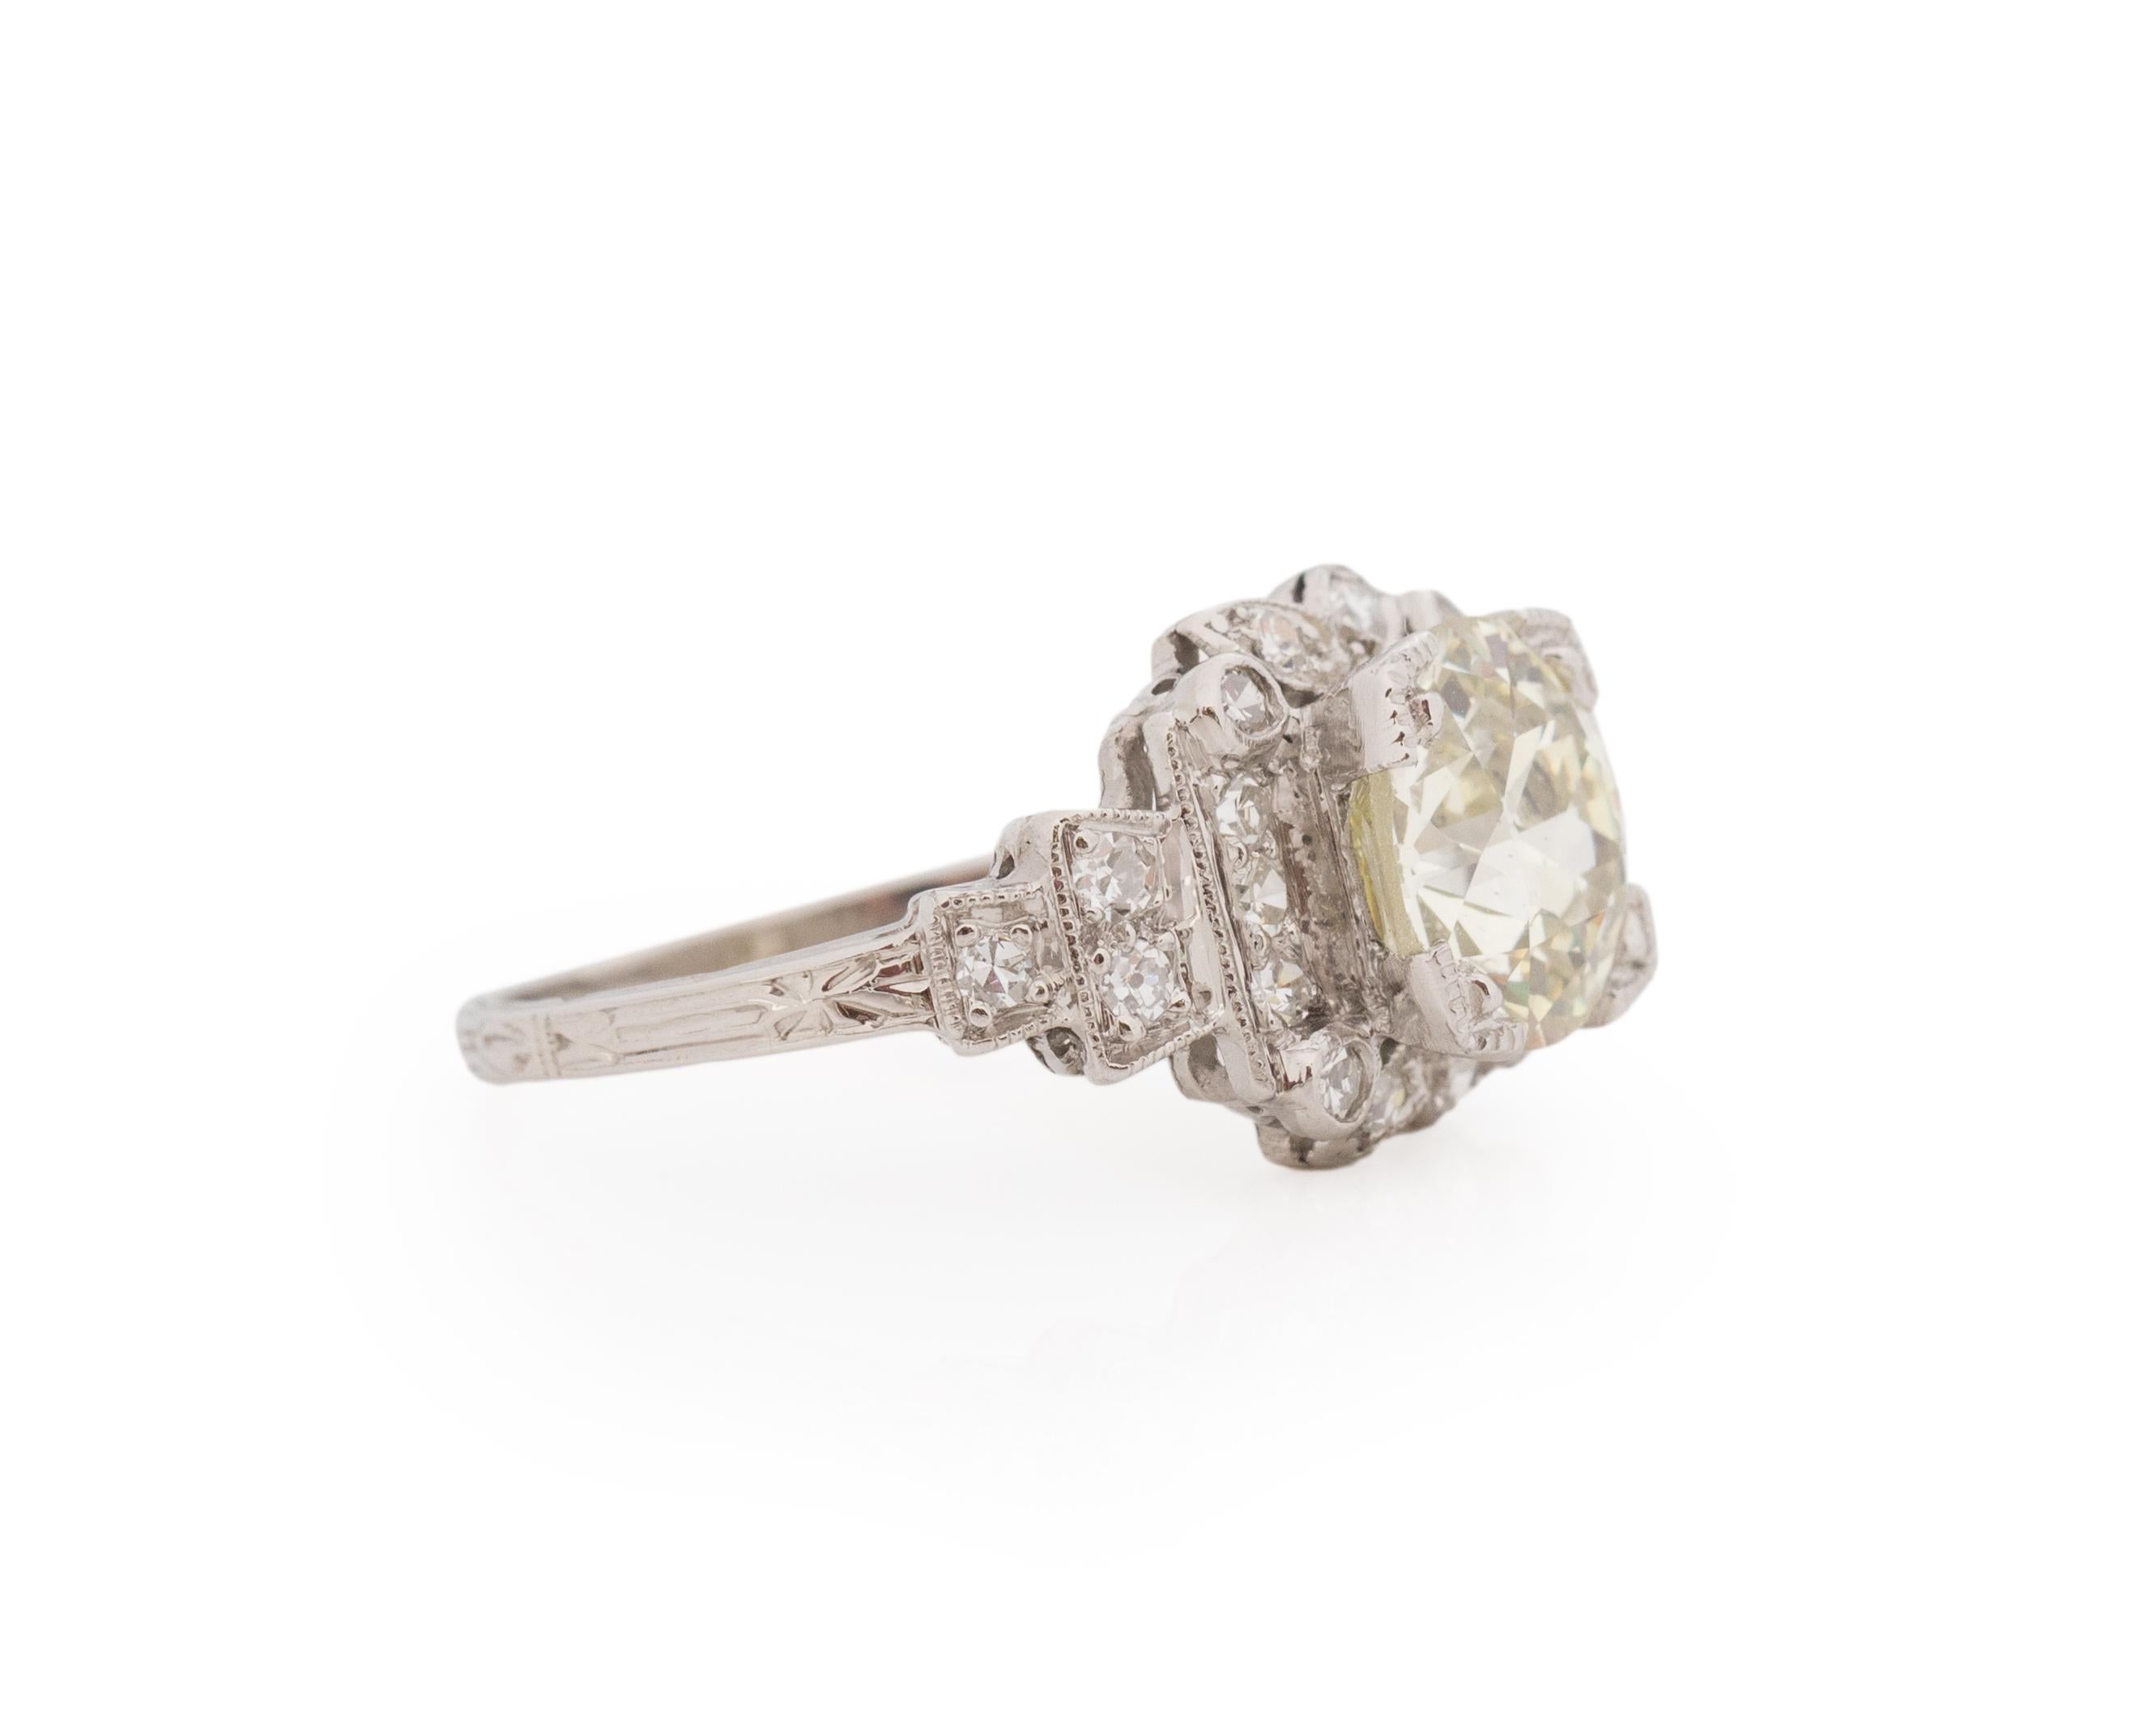 Ring Size: 6.25
Metal Type: Platinum [Hallmarked, and Tested]
Weight: 4.5 grams

Center Diamond Details:
GIA REPORT #: 1429369072
Weight: 2.27ct
Cut: Old European brilliant
Color: S-T (Light Yellow)
Clarity: SI1
Measurements: 8.29mm x 8.21mm x